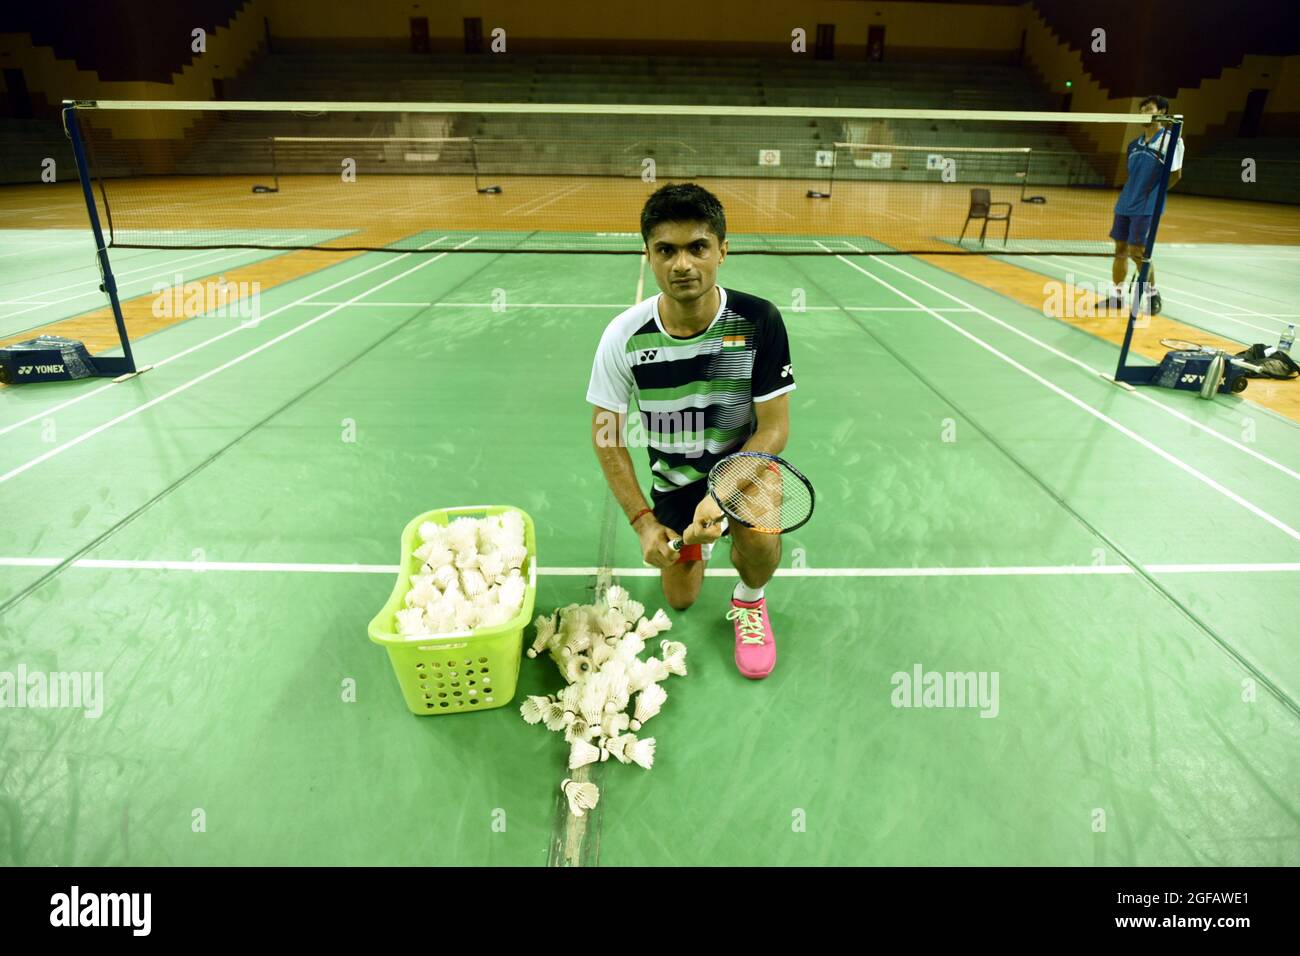 GREATER NOIDA, INDIA - AUGUST 20: Guatam Budh Nagar Magistrate and para-badminton player Suhas Lalinakere Yathiraj during practice session at a stadium, on August 20, 2021 in Greater Noida, India. IAS Suhas LY, currently world number two will represent India in men’s singles SL4 at the Tokyo Paralympics Games. The GB Nagar DM is 2018 Asian Para Games bronze medallist and 2016 Asian Championships gold medallist in the sport. (Photo by Sunil Ghosh/Hindustan Times/Sipa USA) Stock Photo